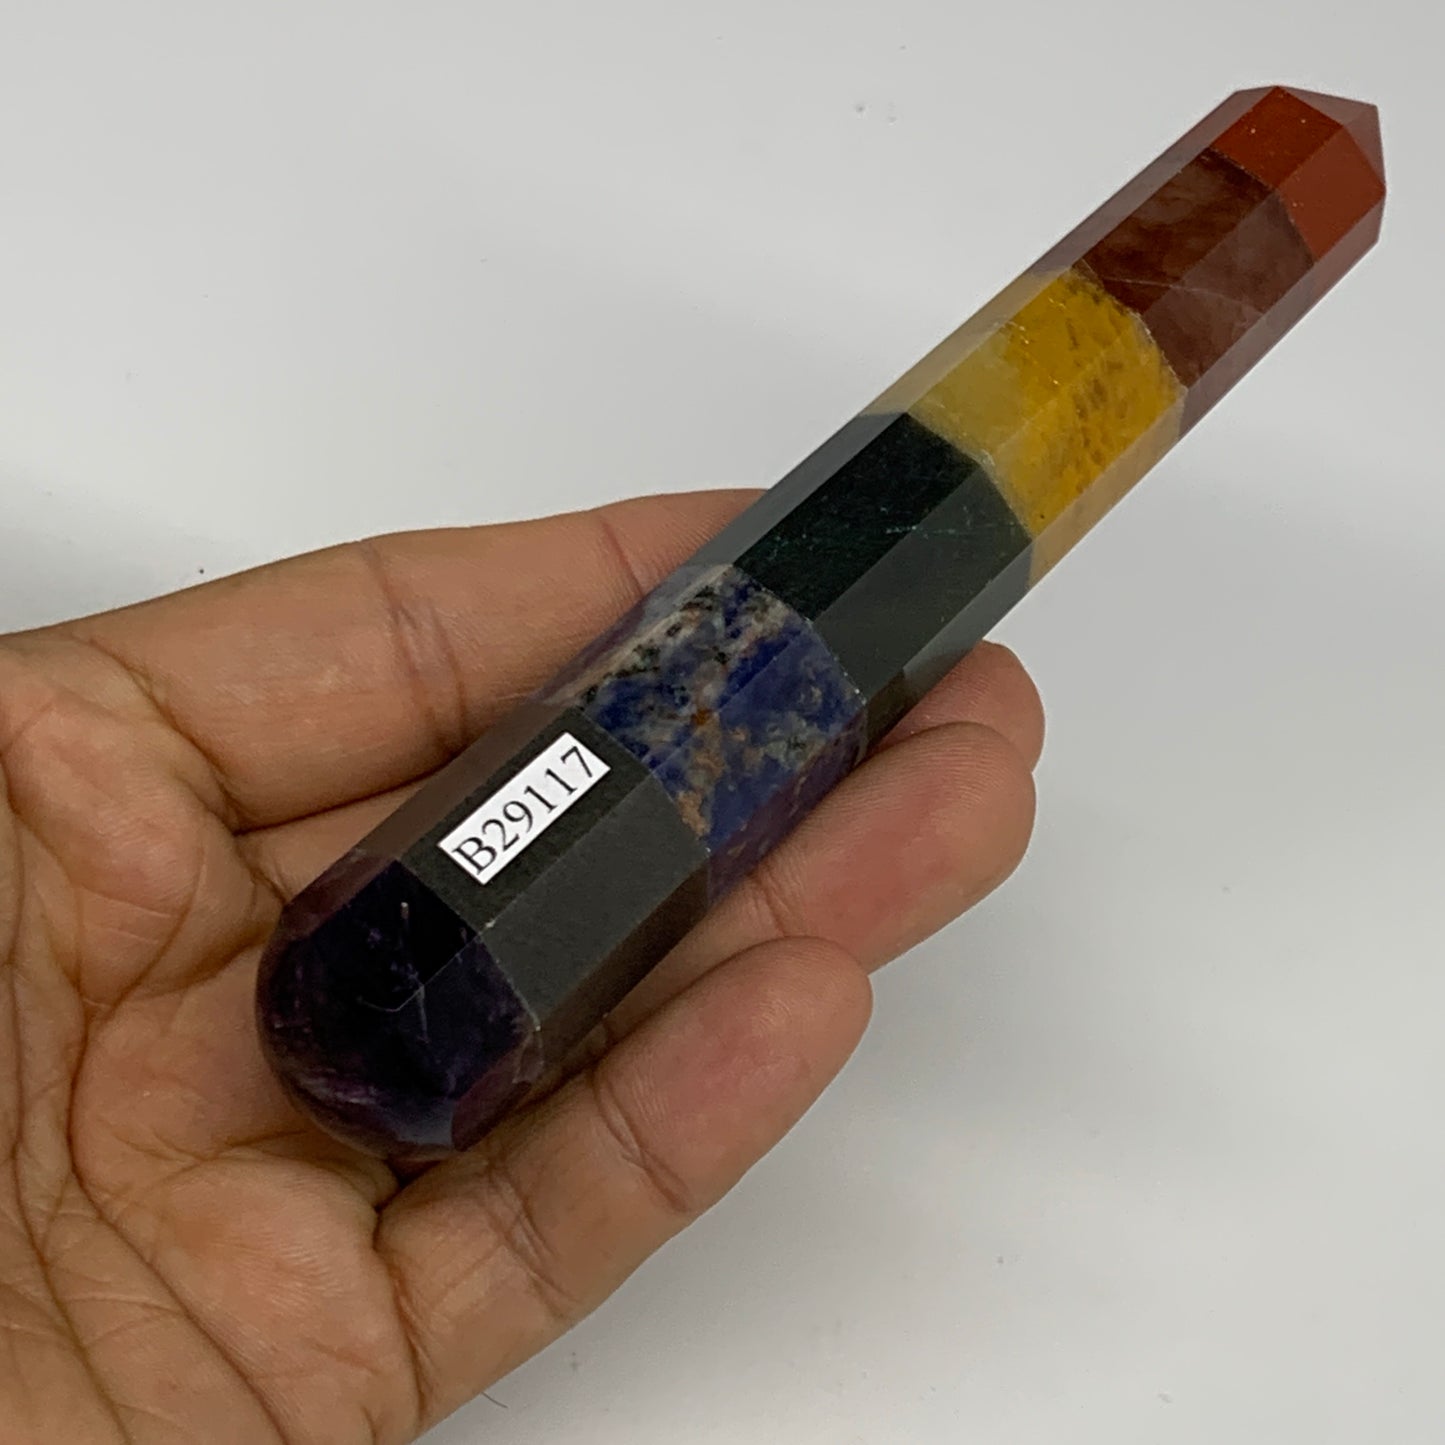 98.6g, 5.1"x0.9", 7 Chakra Point Wand Obelisk Point Crystal from India, B29117